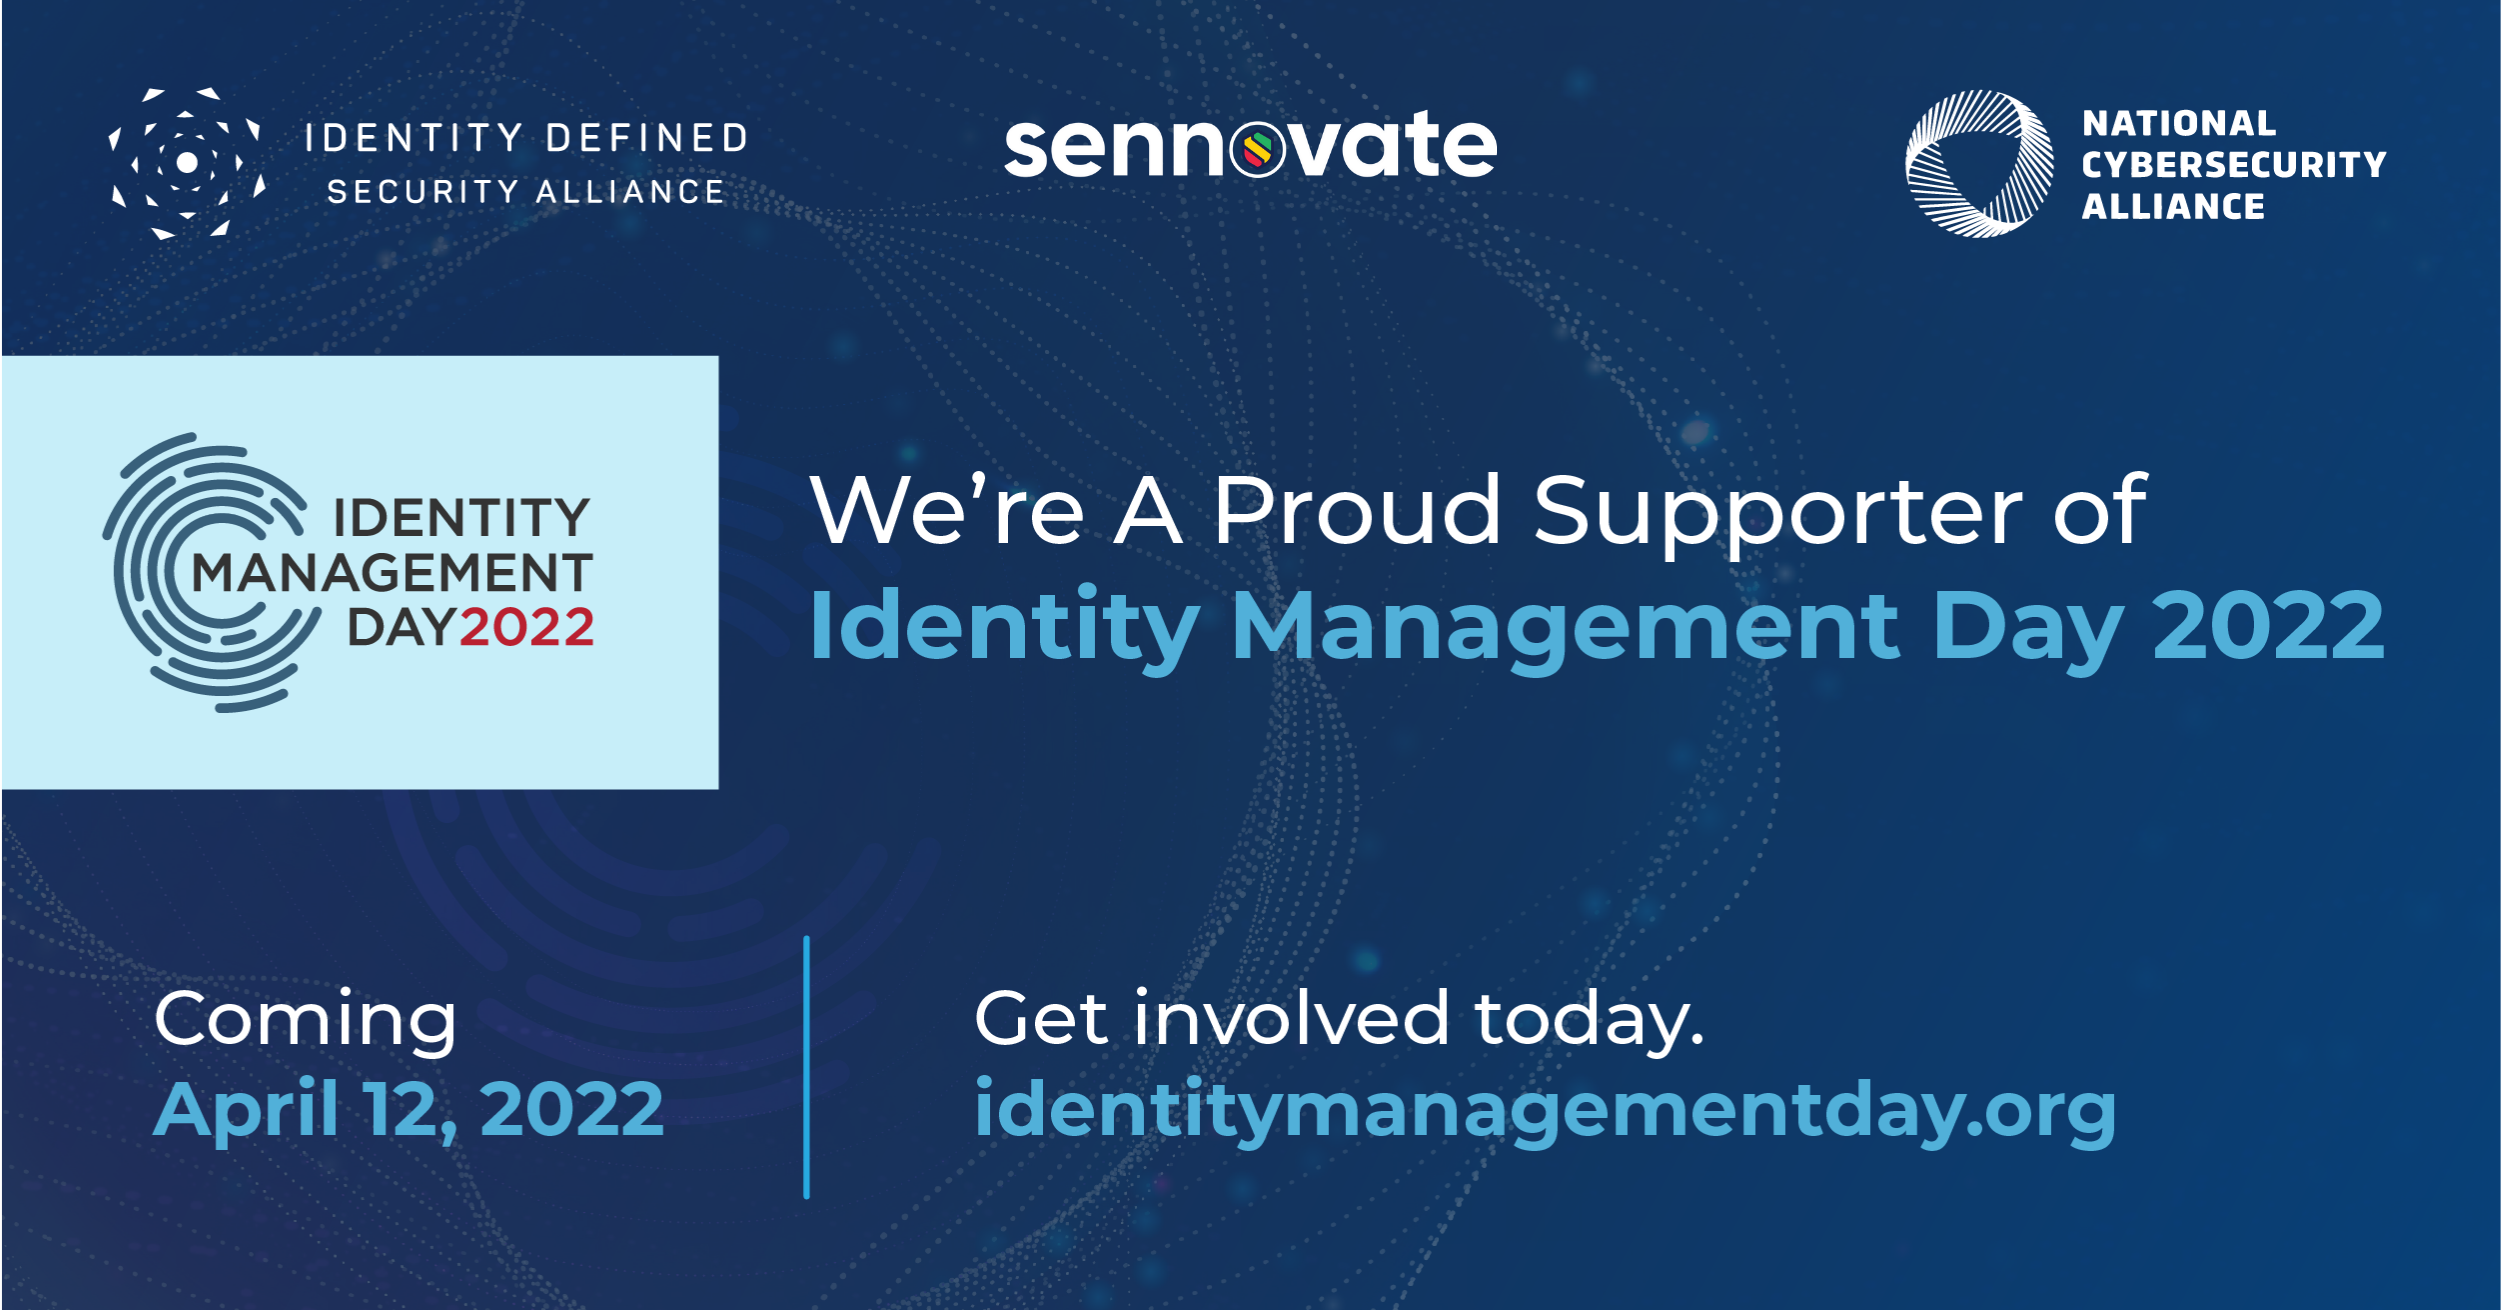 Sennovate is supporting the Identity Management Day